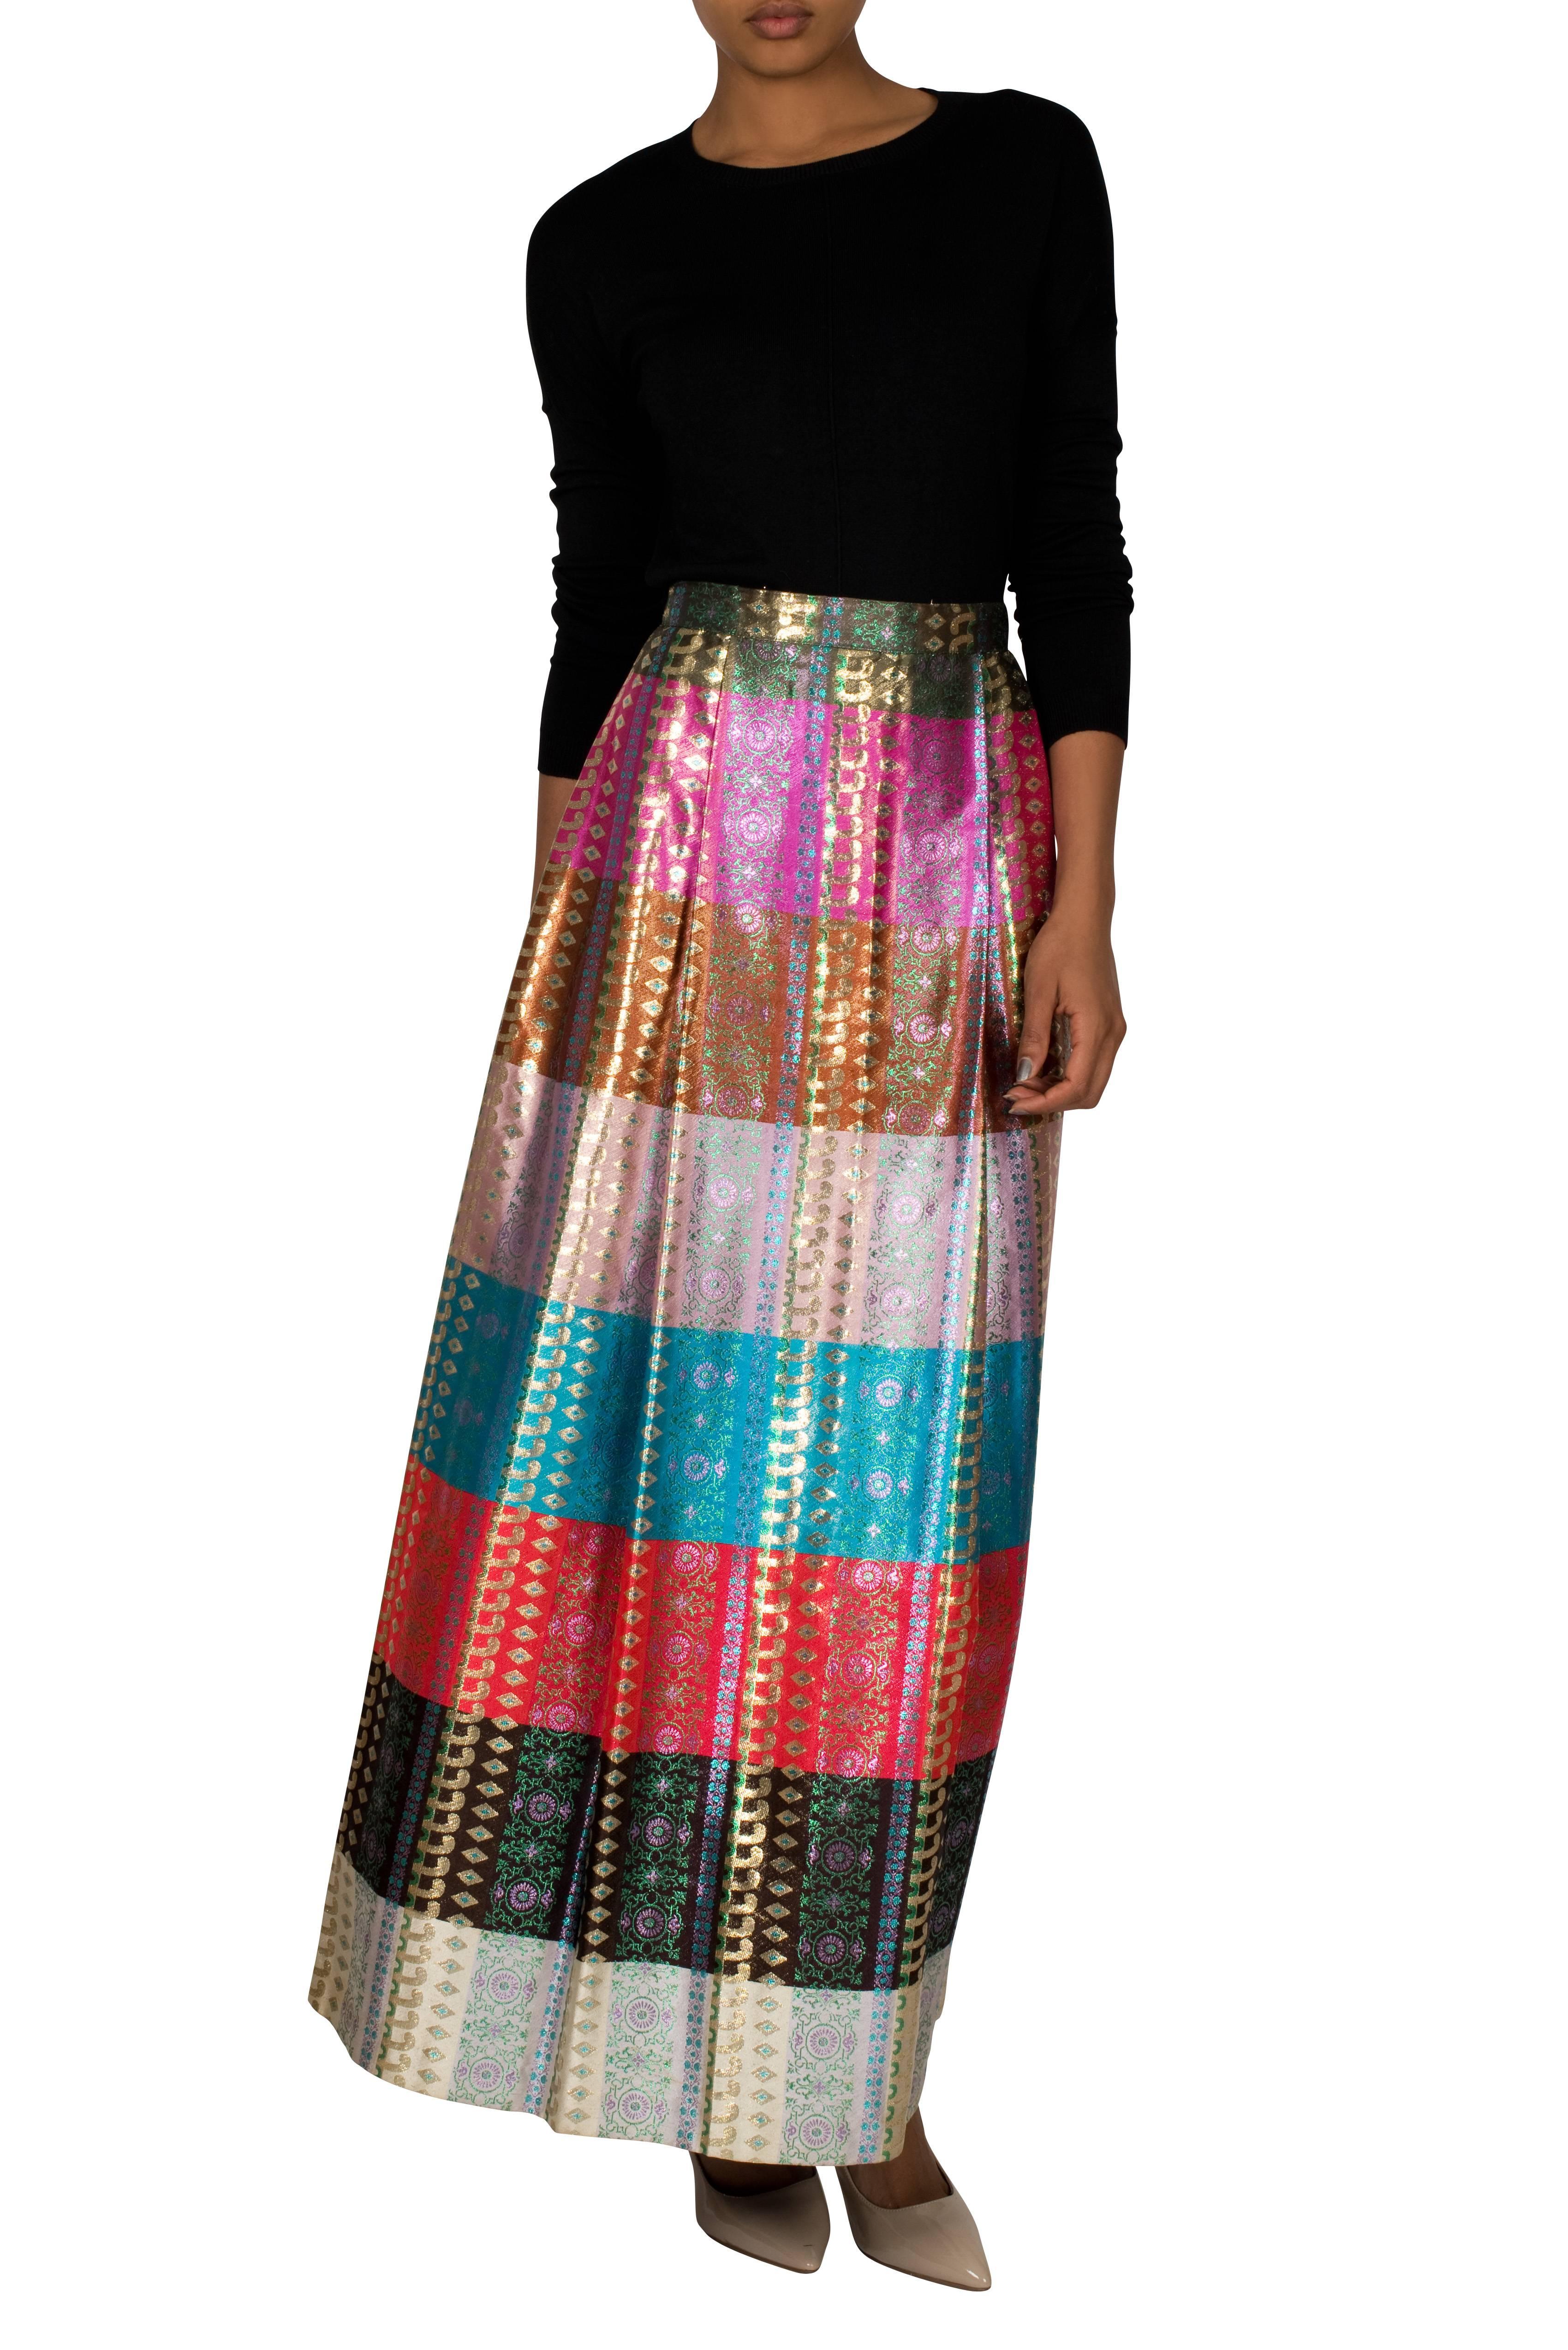 Elaborate 1970's maxi skirt with multicolour bands. The striking colours of the horizontal stripes are enhanced by the luxurious sheen, which translates glamour onto this beautiful piece. The metallic fibres in the fabric make it slightly rough to